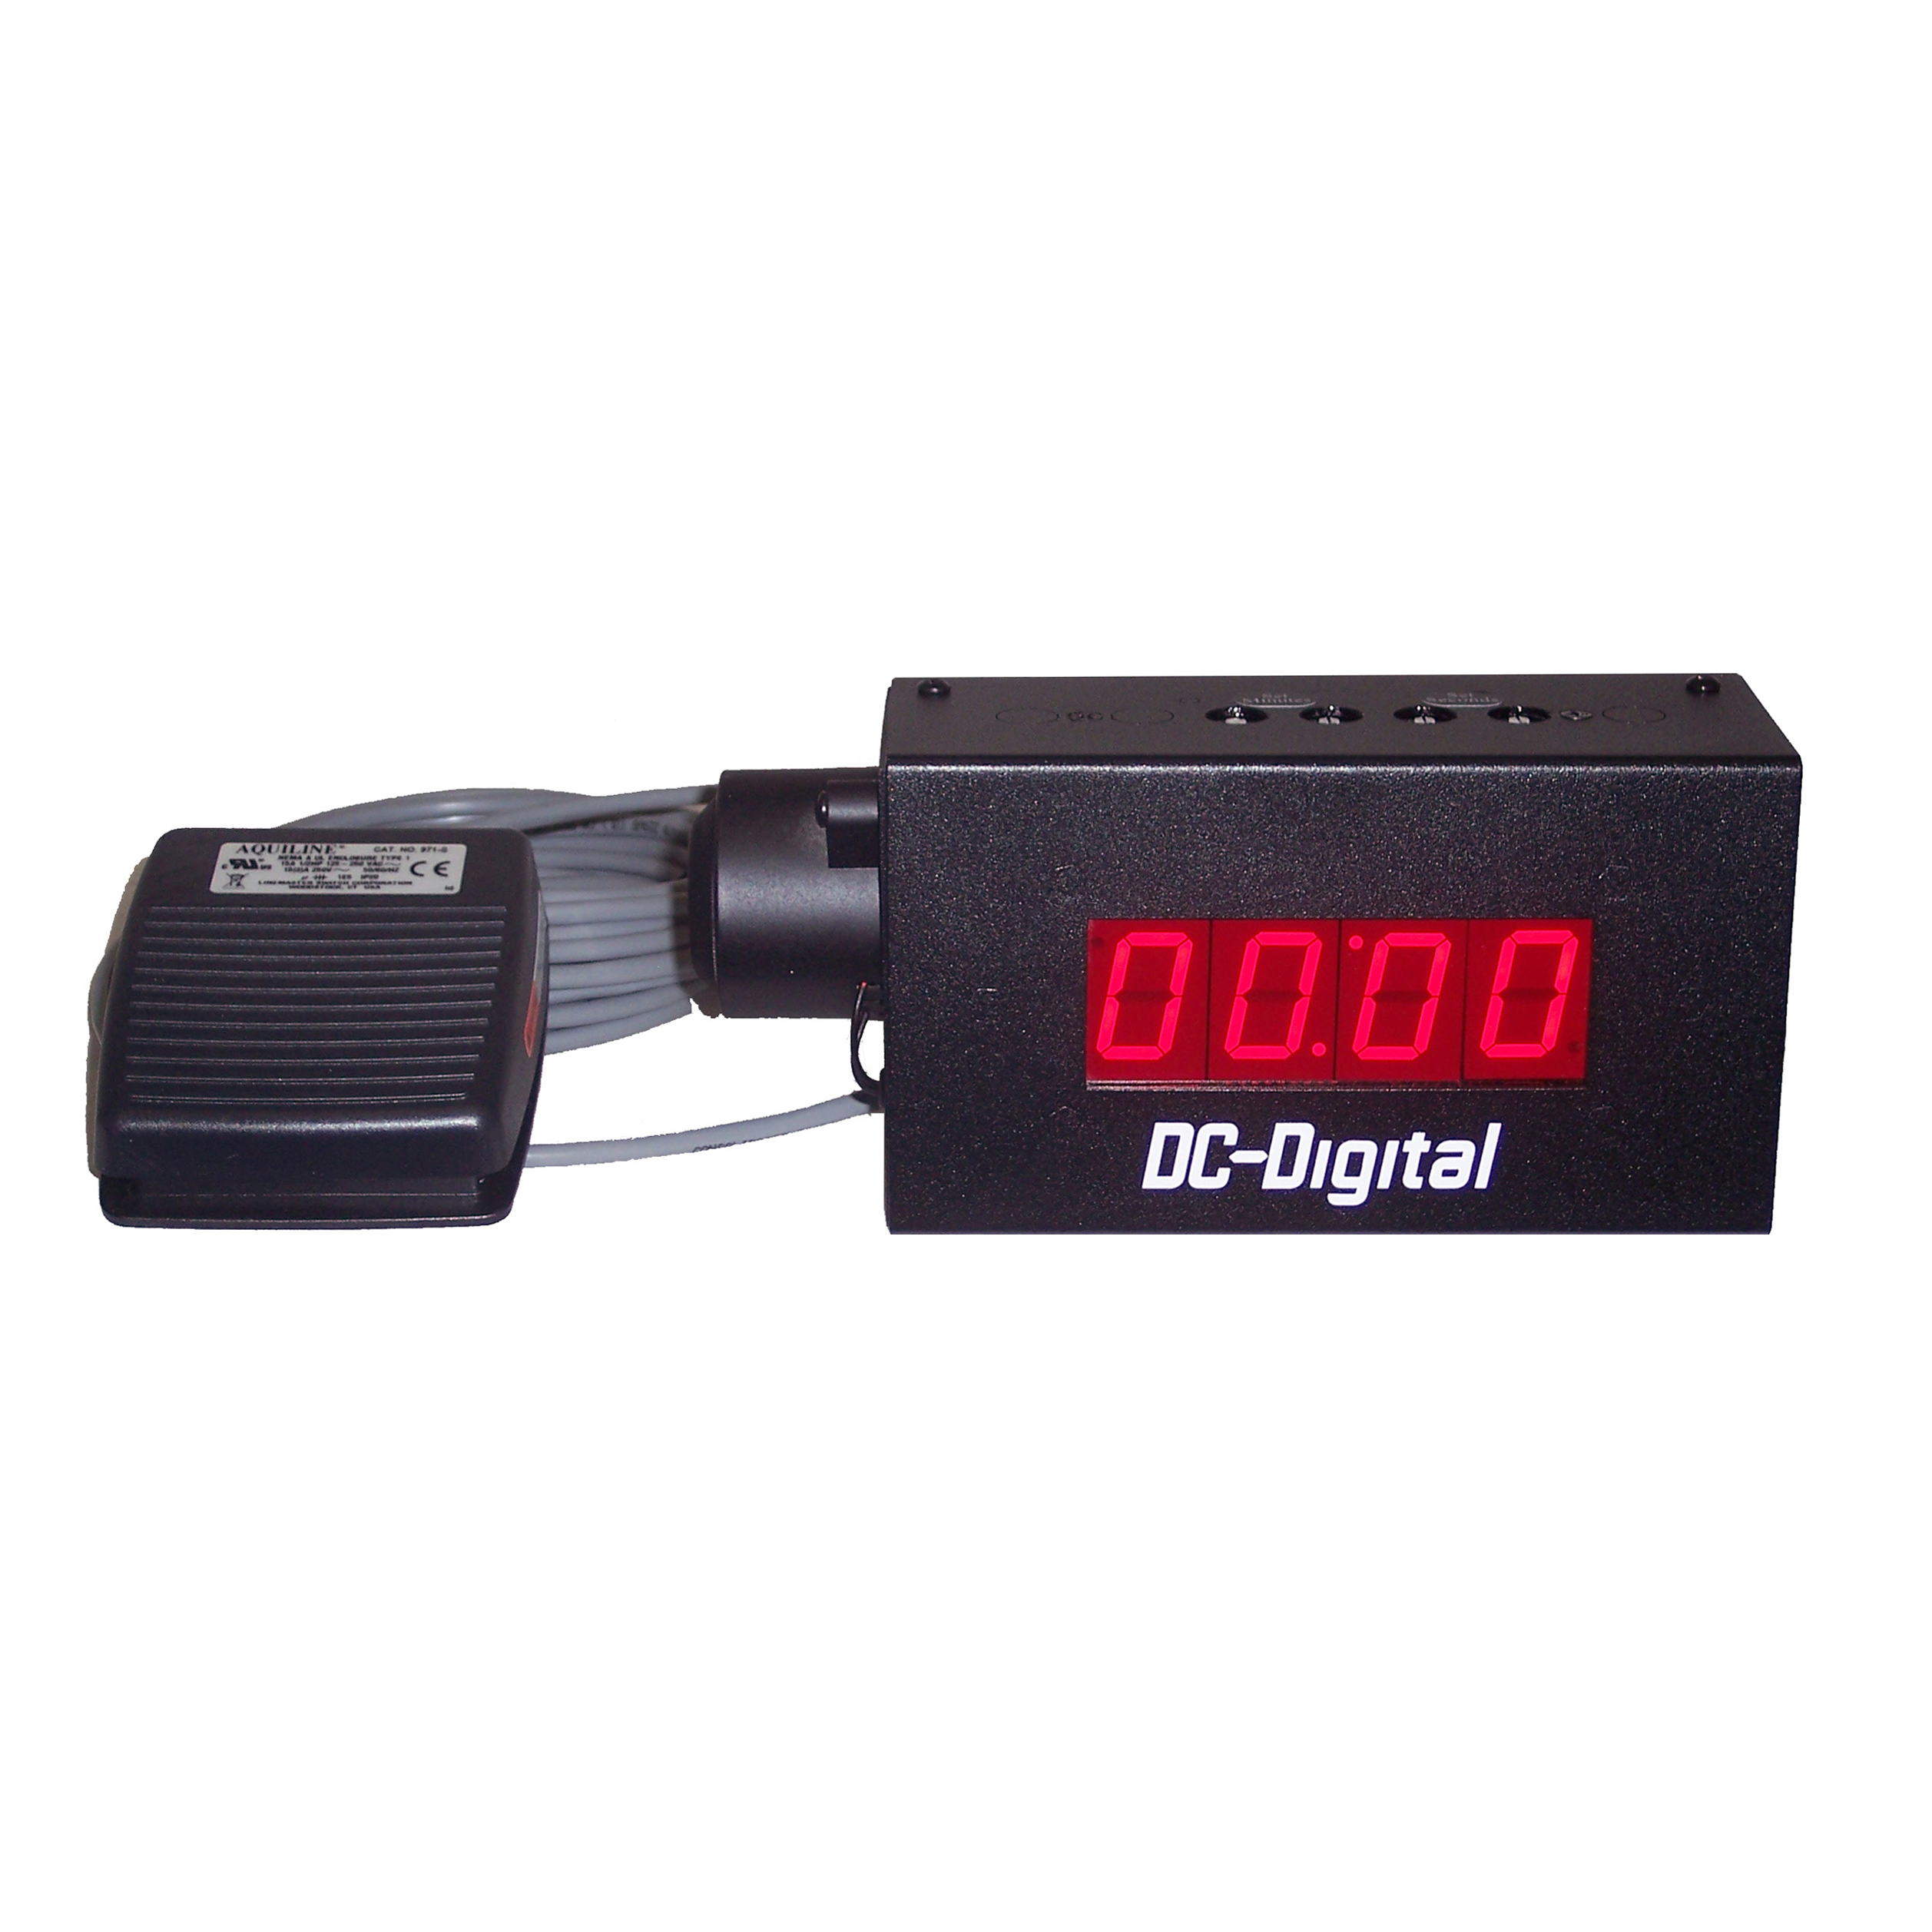 (DC-10T-DN-BCD-FOOT-HI-EOP) 1.0 Inch LED, BCD Rotary Switch Set, Foot-Switch Controlled, Digital Countdown Process Timer with High Output Adjustable EOP Buzzer